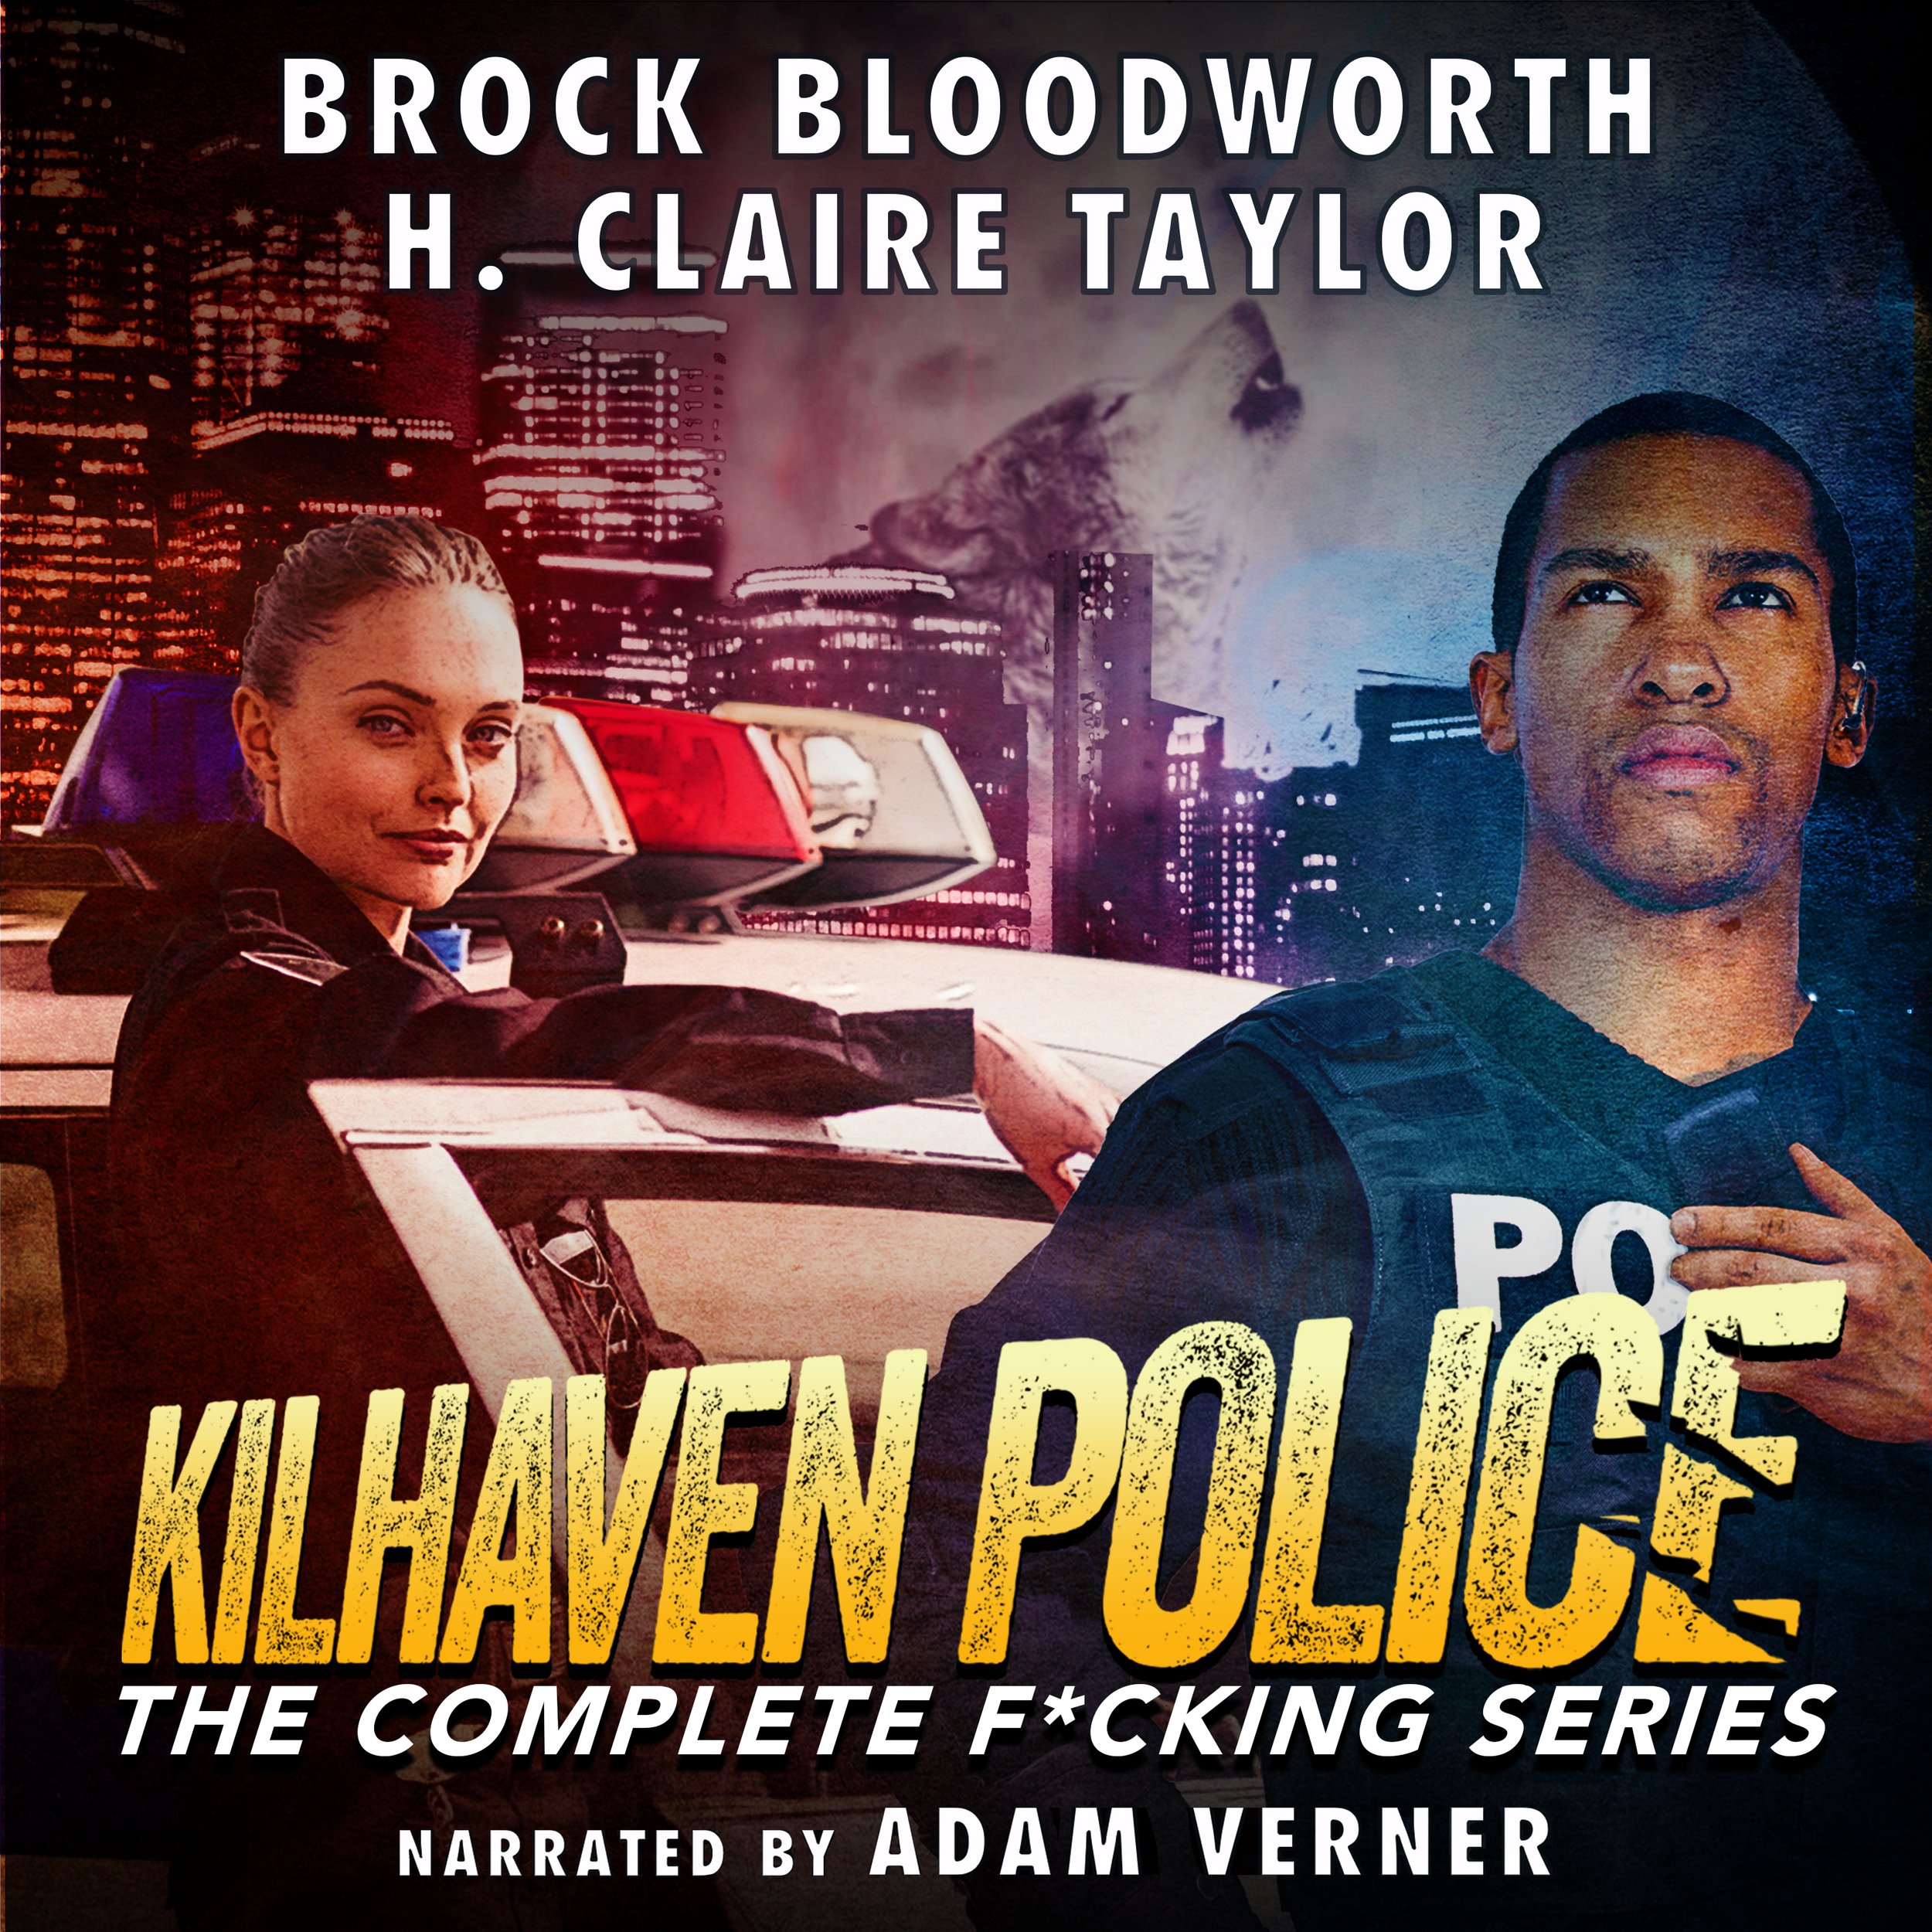 Kilhaven Police: The Complete Fucking Series